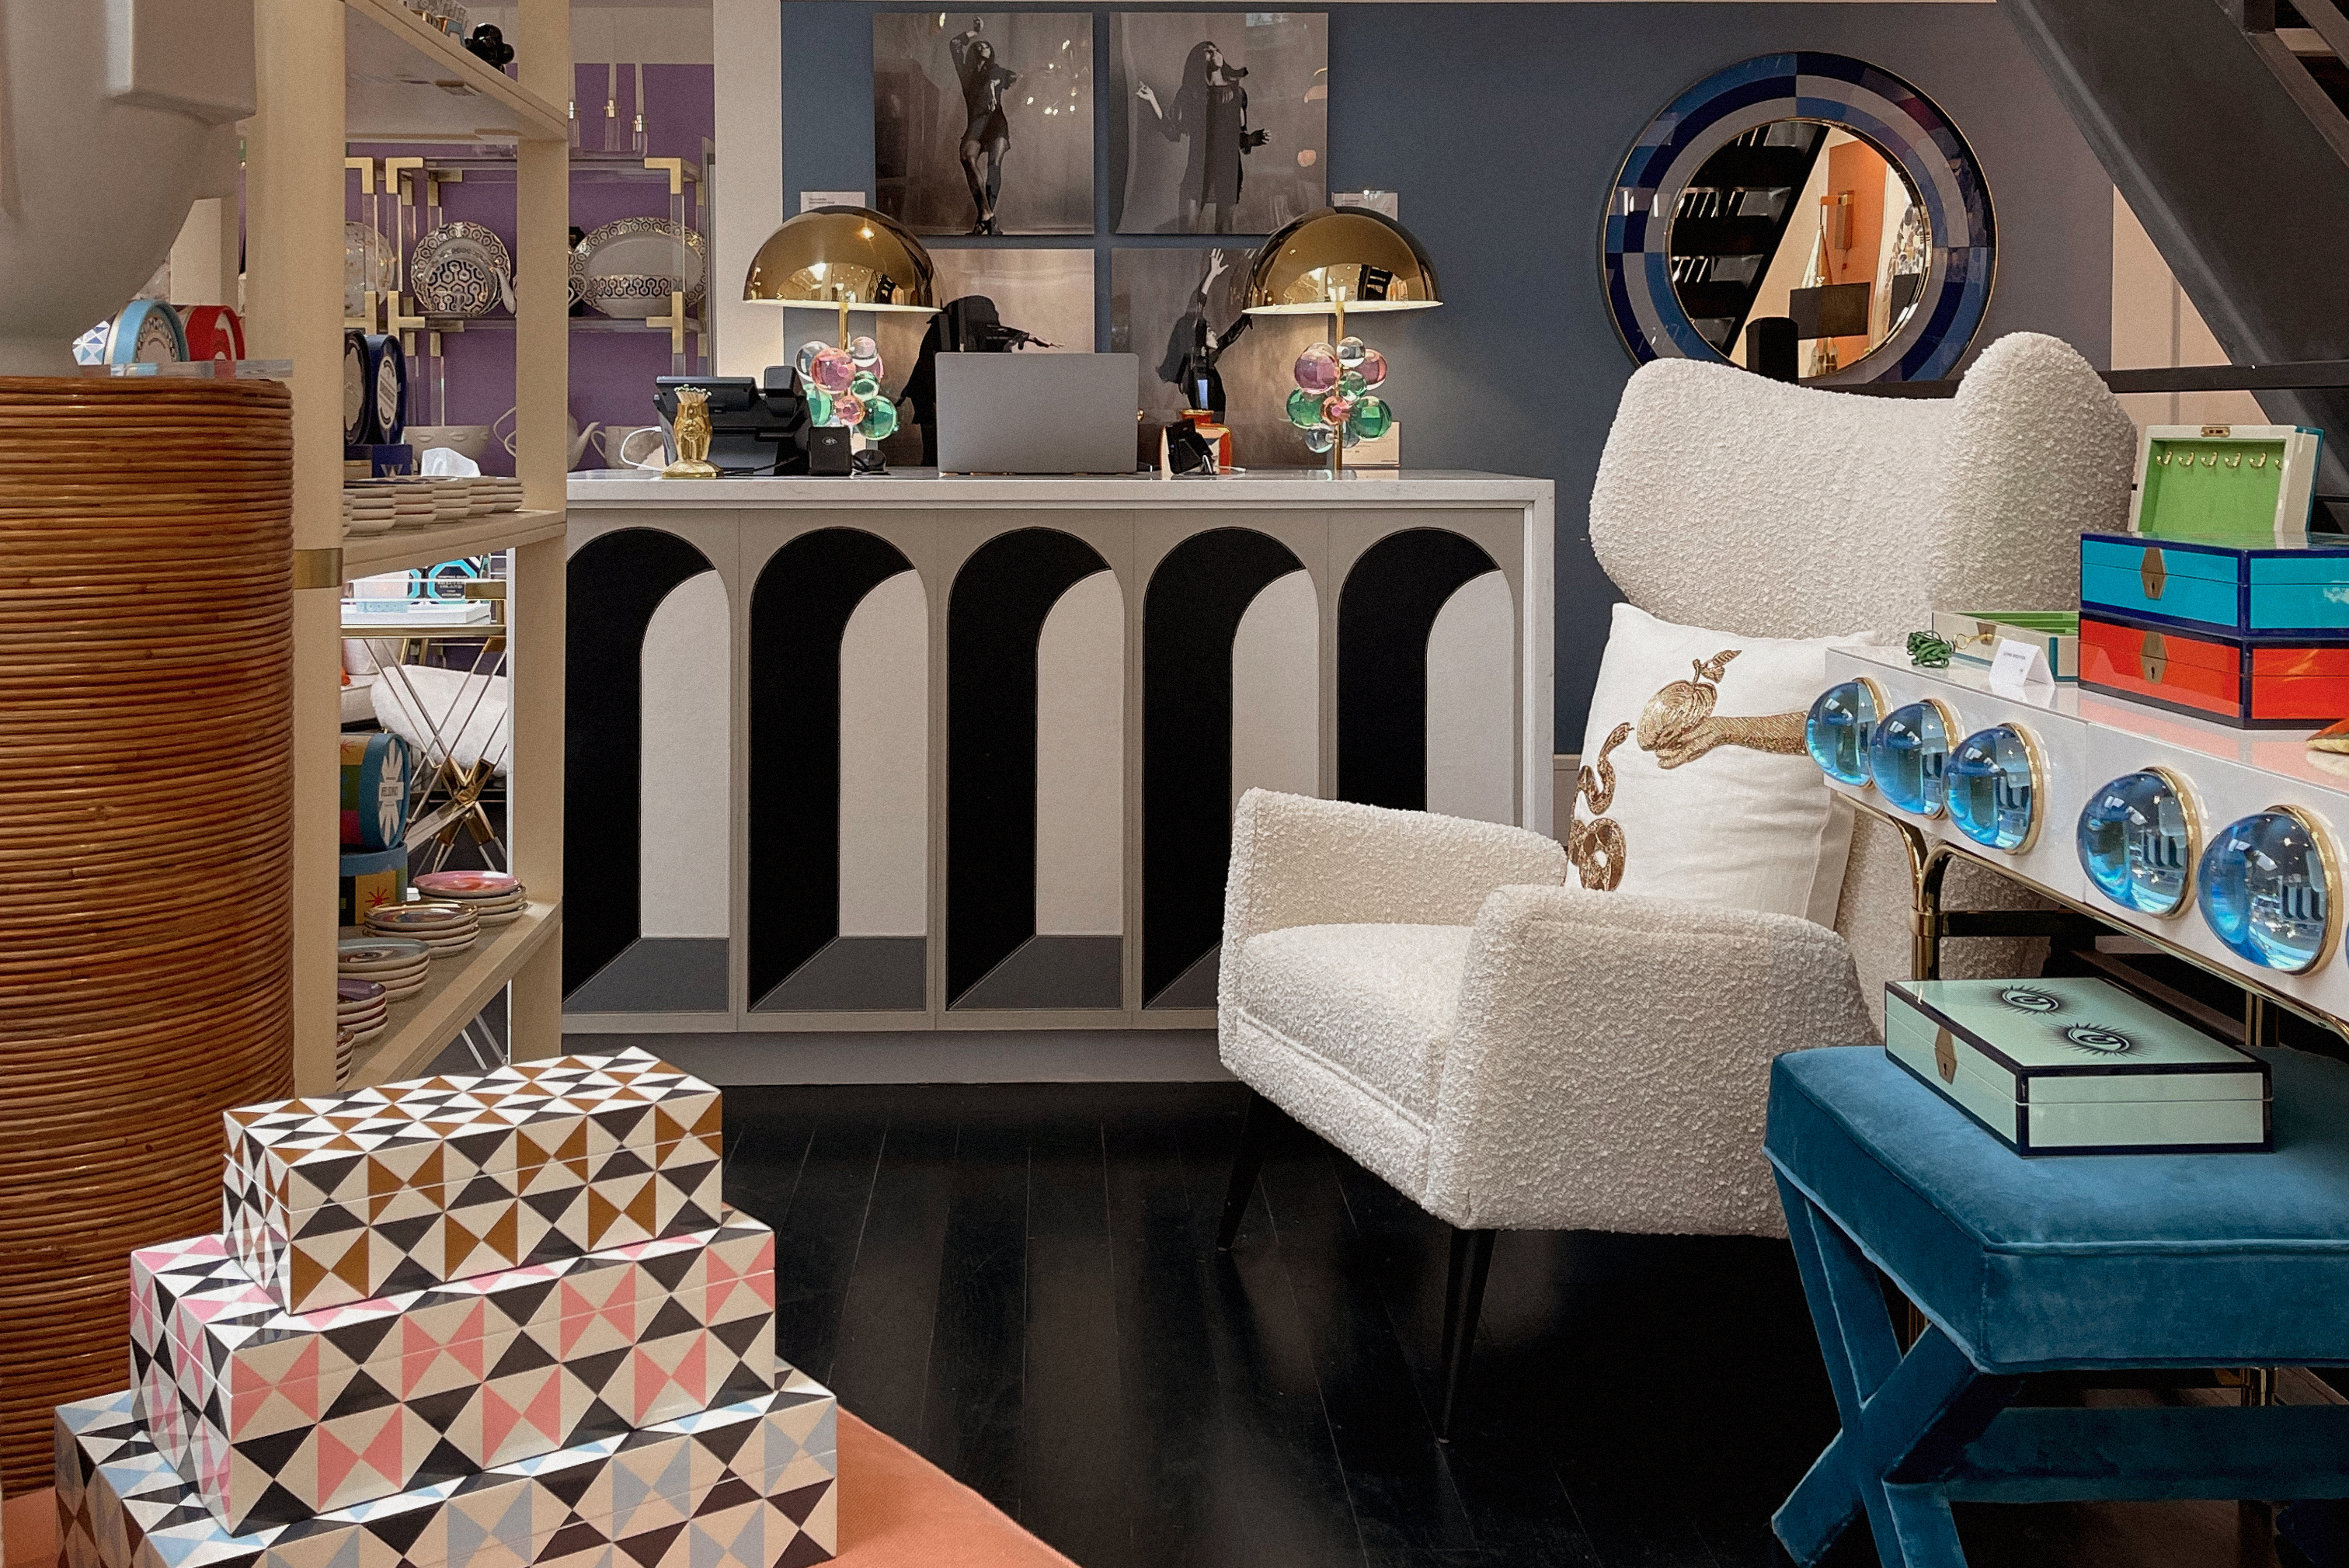 House & Home - Get Design Advice From Jonathan Adler's New Show